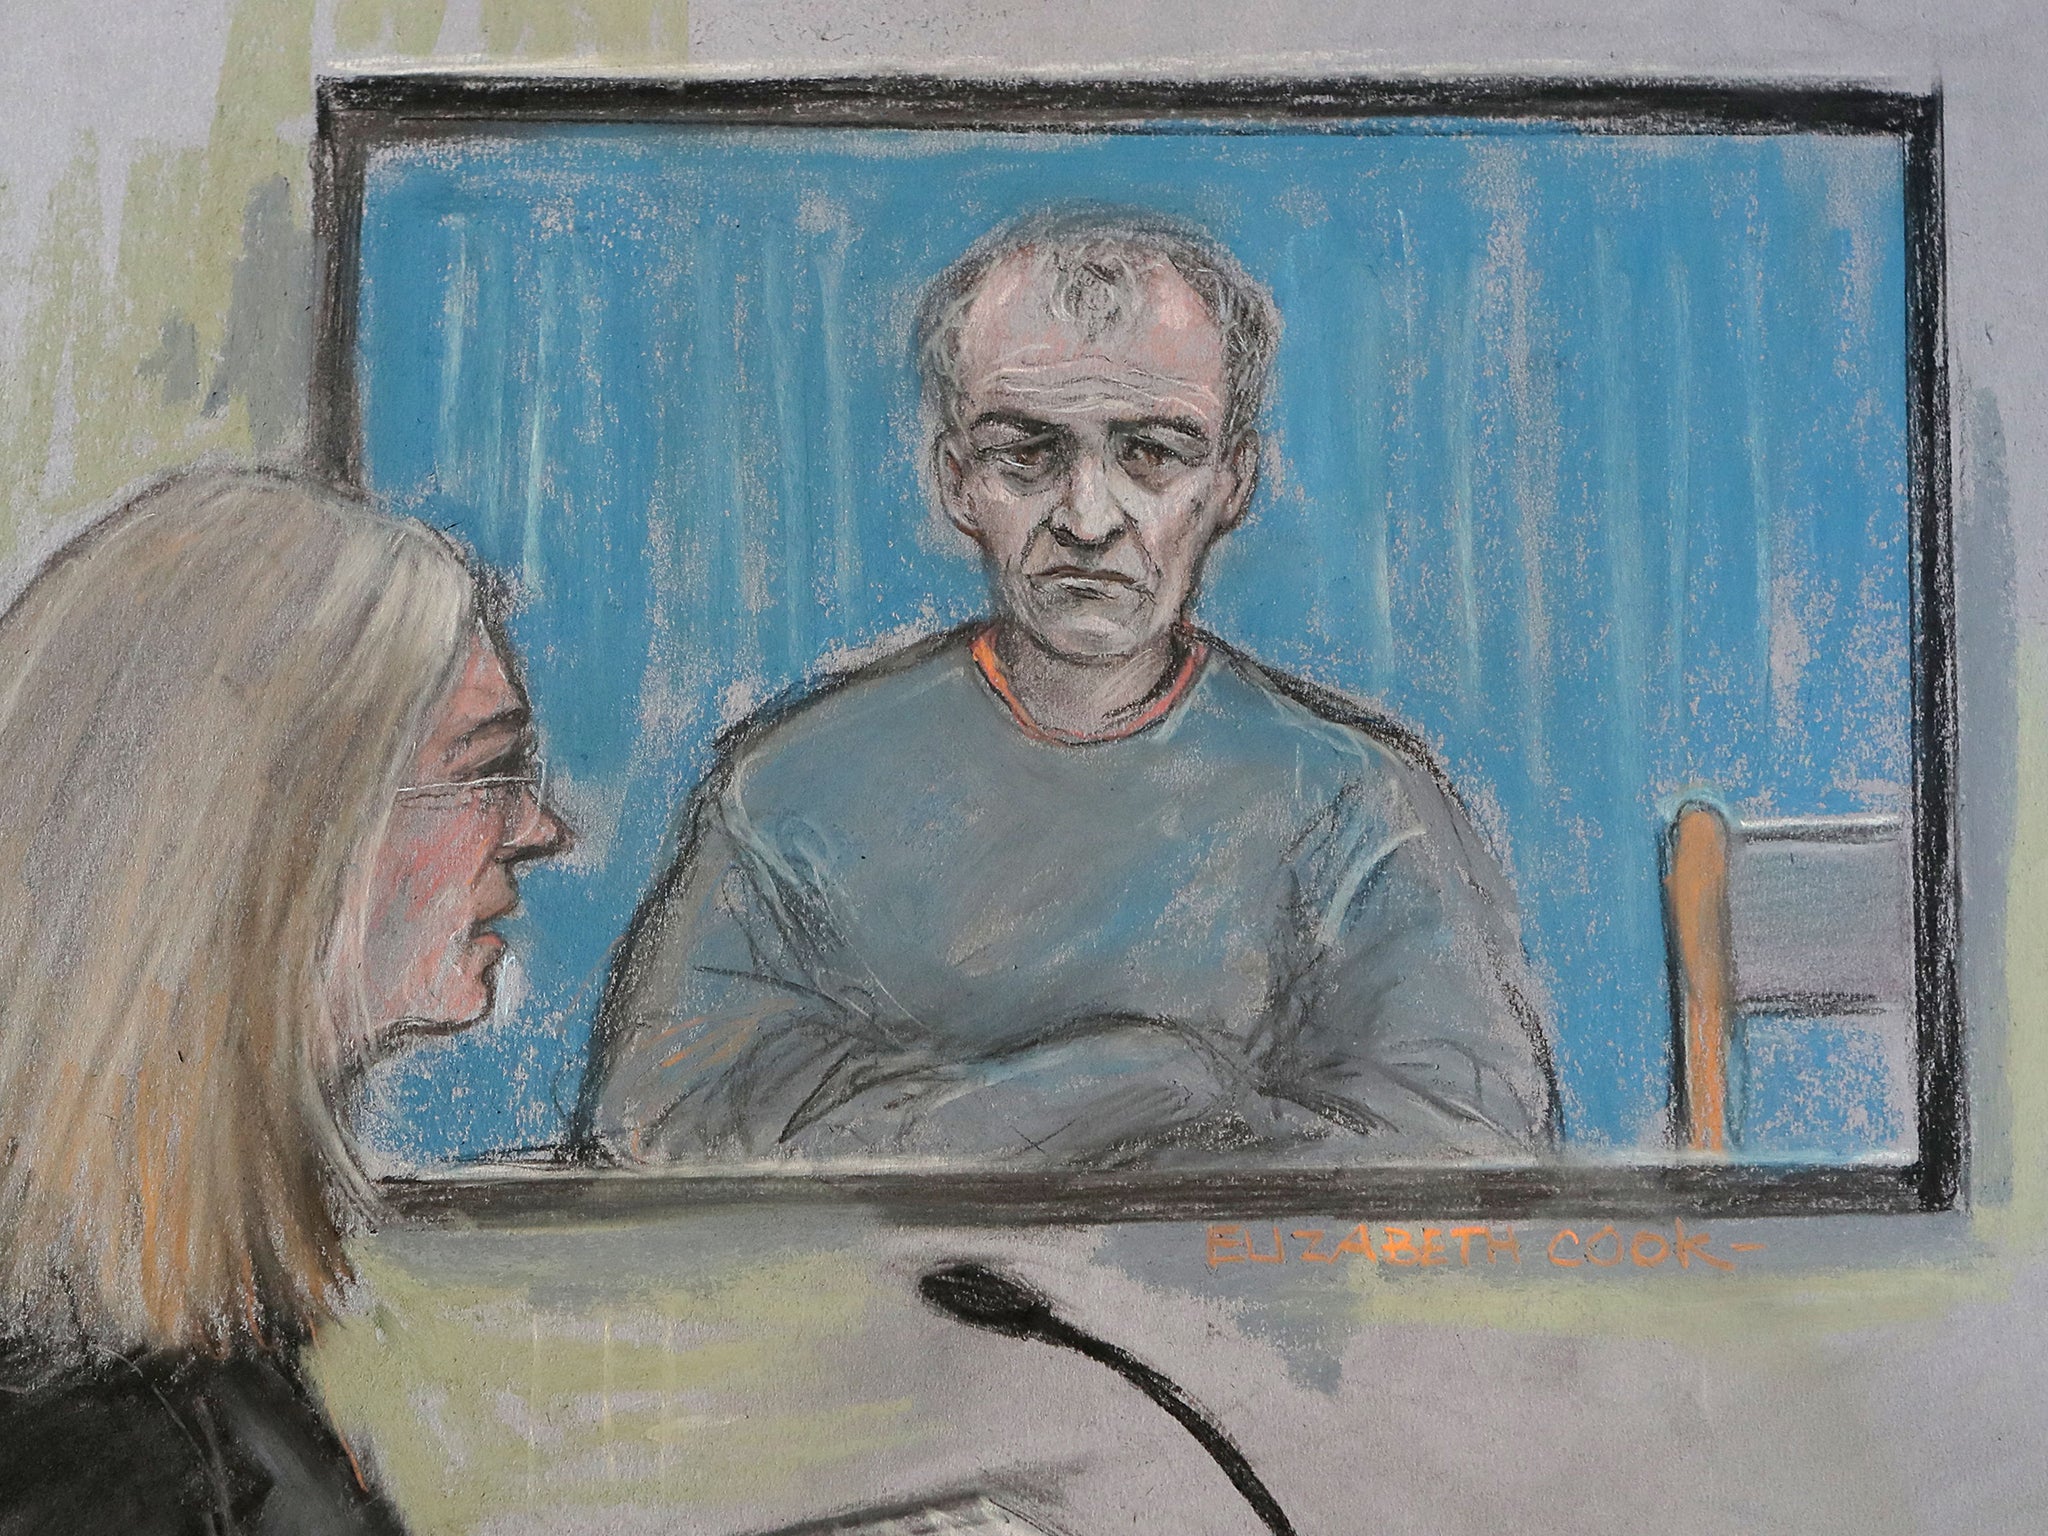 Barry Bennell appeared at the trial yesterday via video link